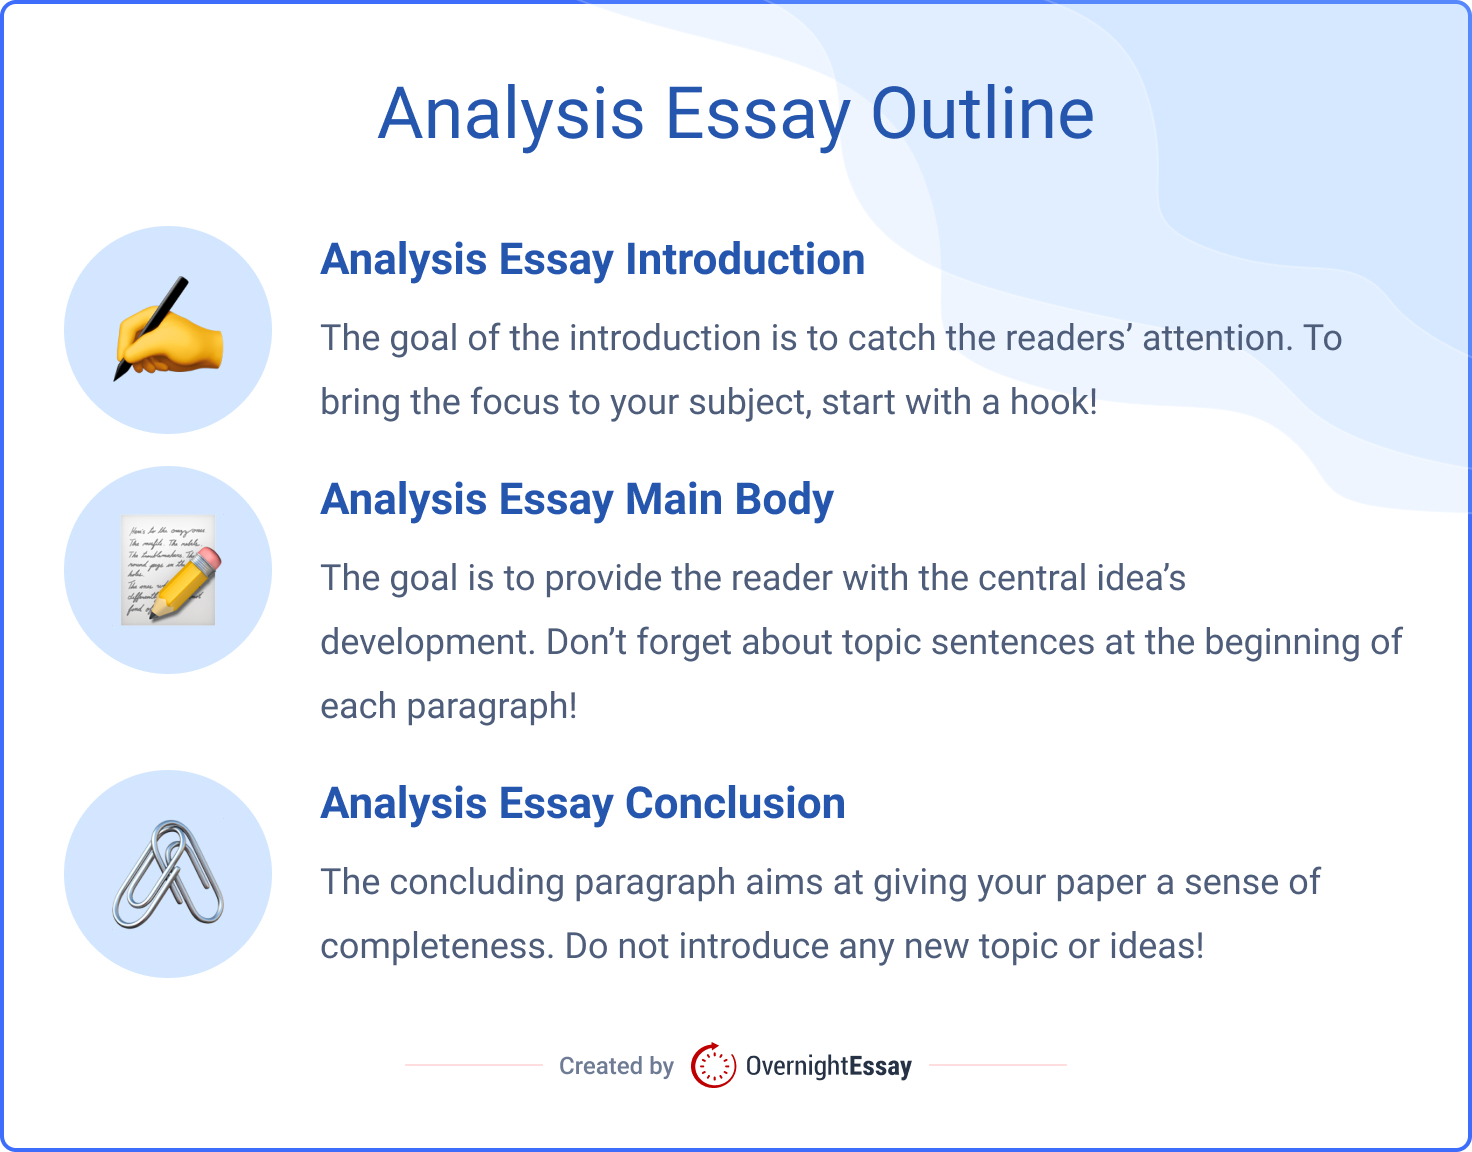 analyze meaning in essay